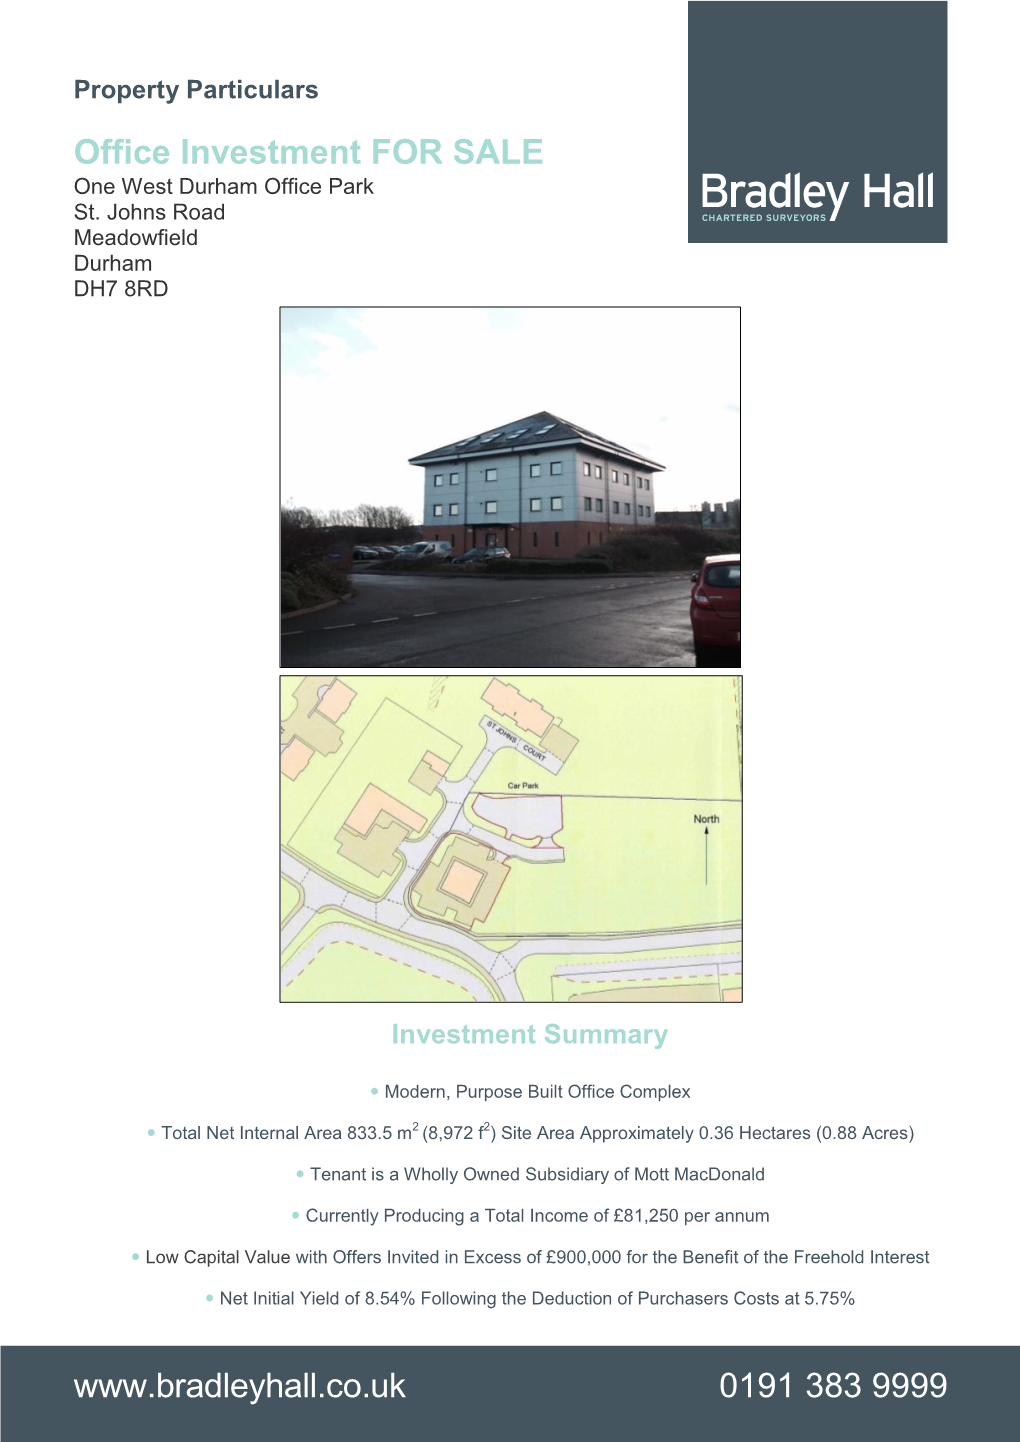 Property Particulars Office Investment for SALE